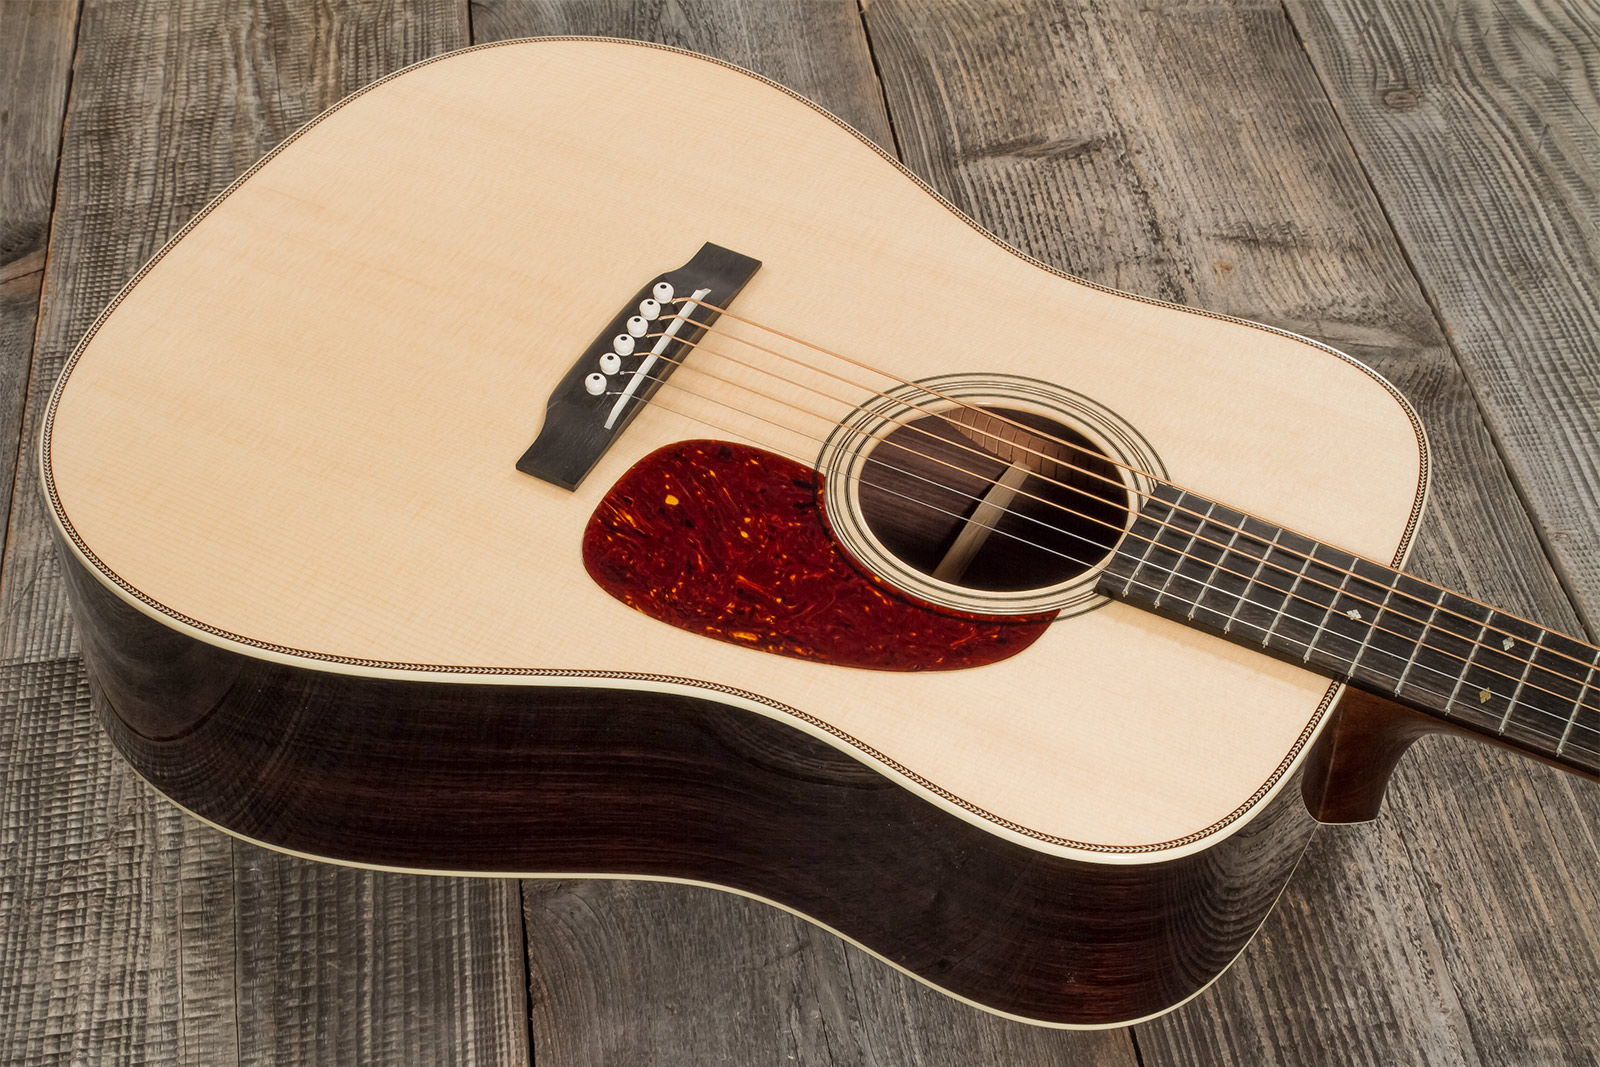 Collings D2h Custom Dreadnought Epicea Palissandre Eb #33756 - Natural High Gloss - Guitare Acoustique - Variation 2